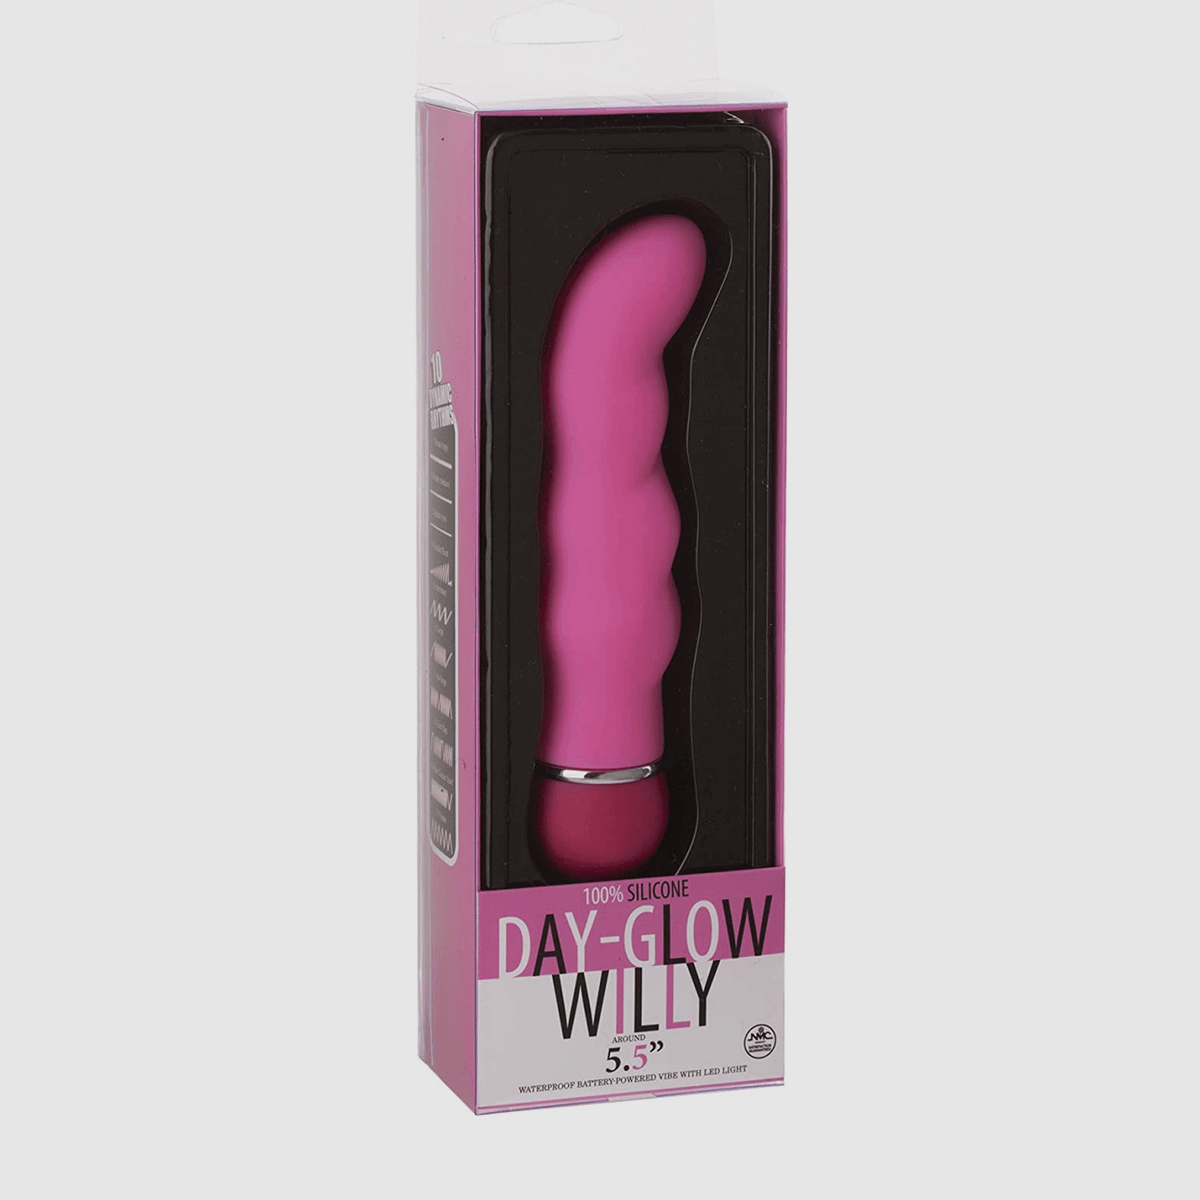 5.5" Day-Glow Willy - G-Spot in pink-T&F 3YRS Anniversary Sale - Thorn & Feather